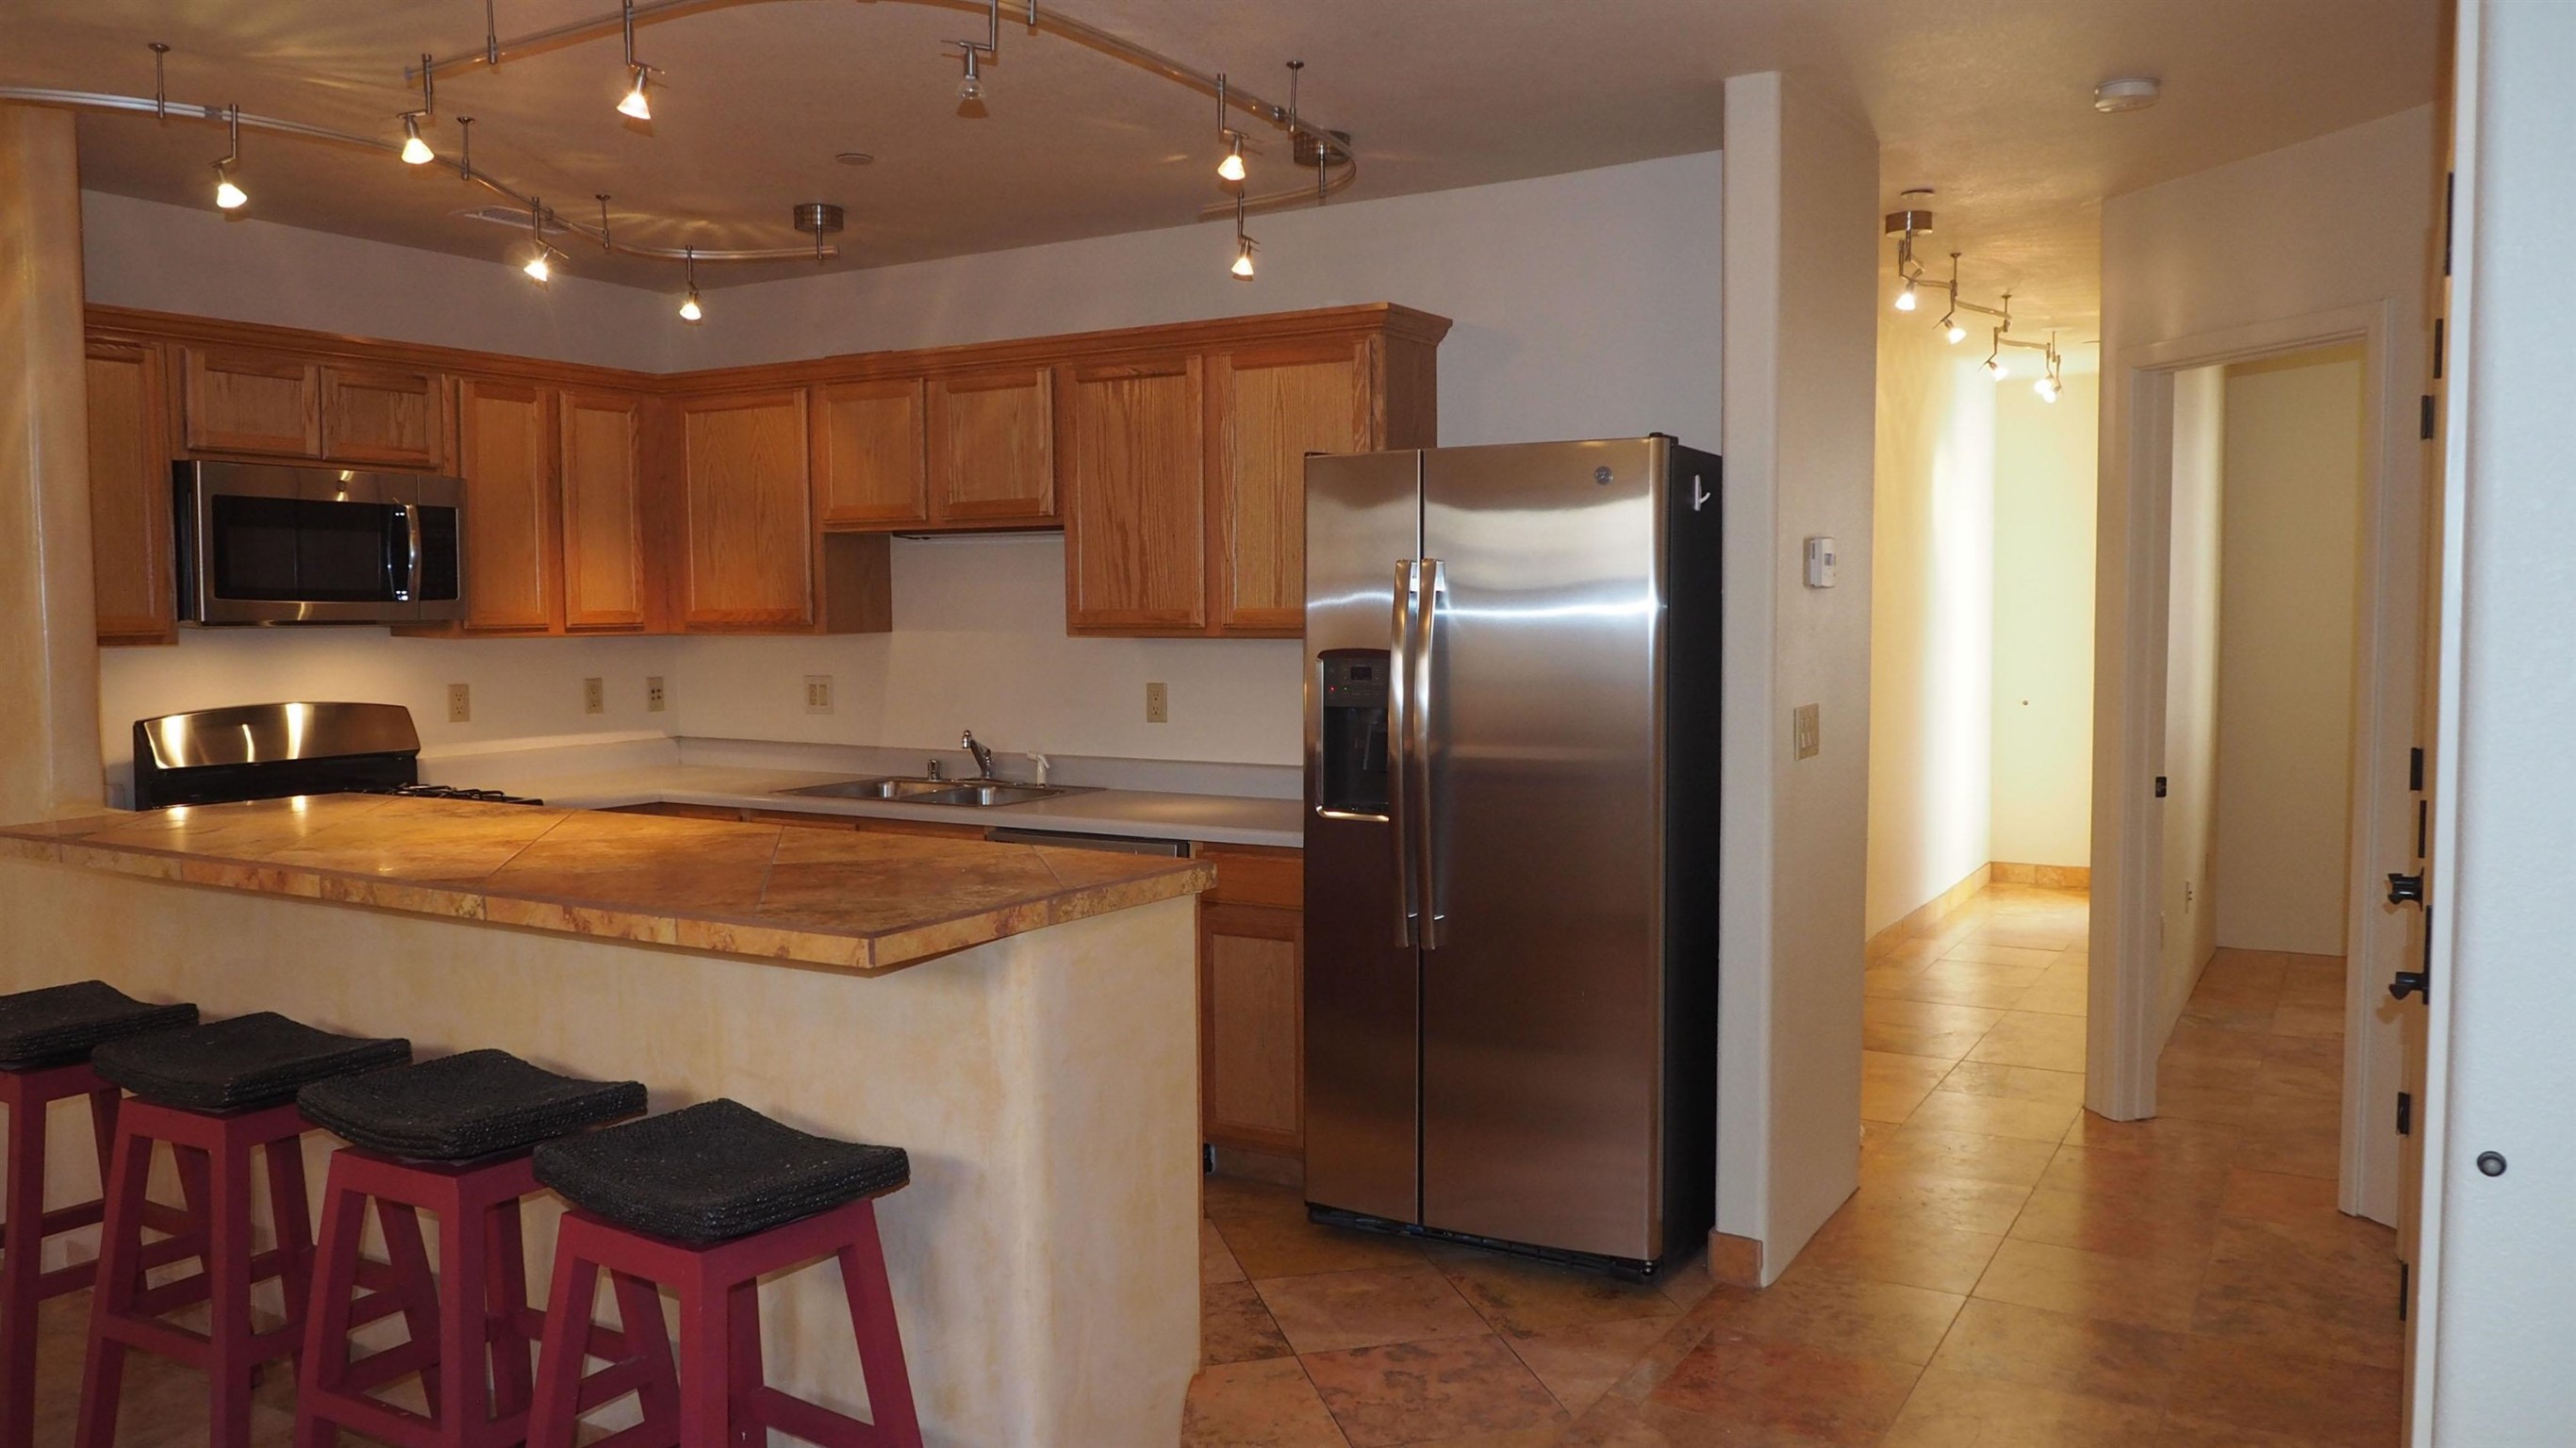 103 Catron 26, Santa Fe, New Mexico 87501, 2 Bedrooms Bedrooms, ,1 BathroomBathrooms,Residential Lease,For Rent,103 Catron 26,202231903